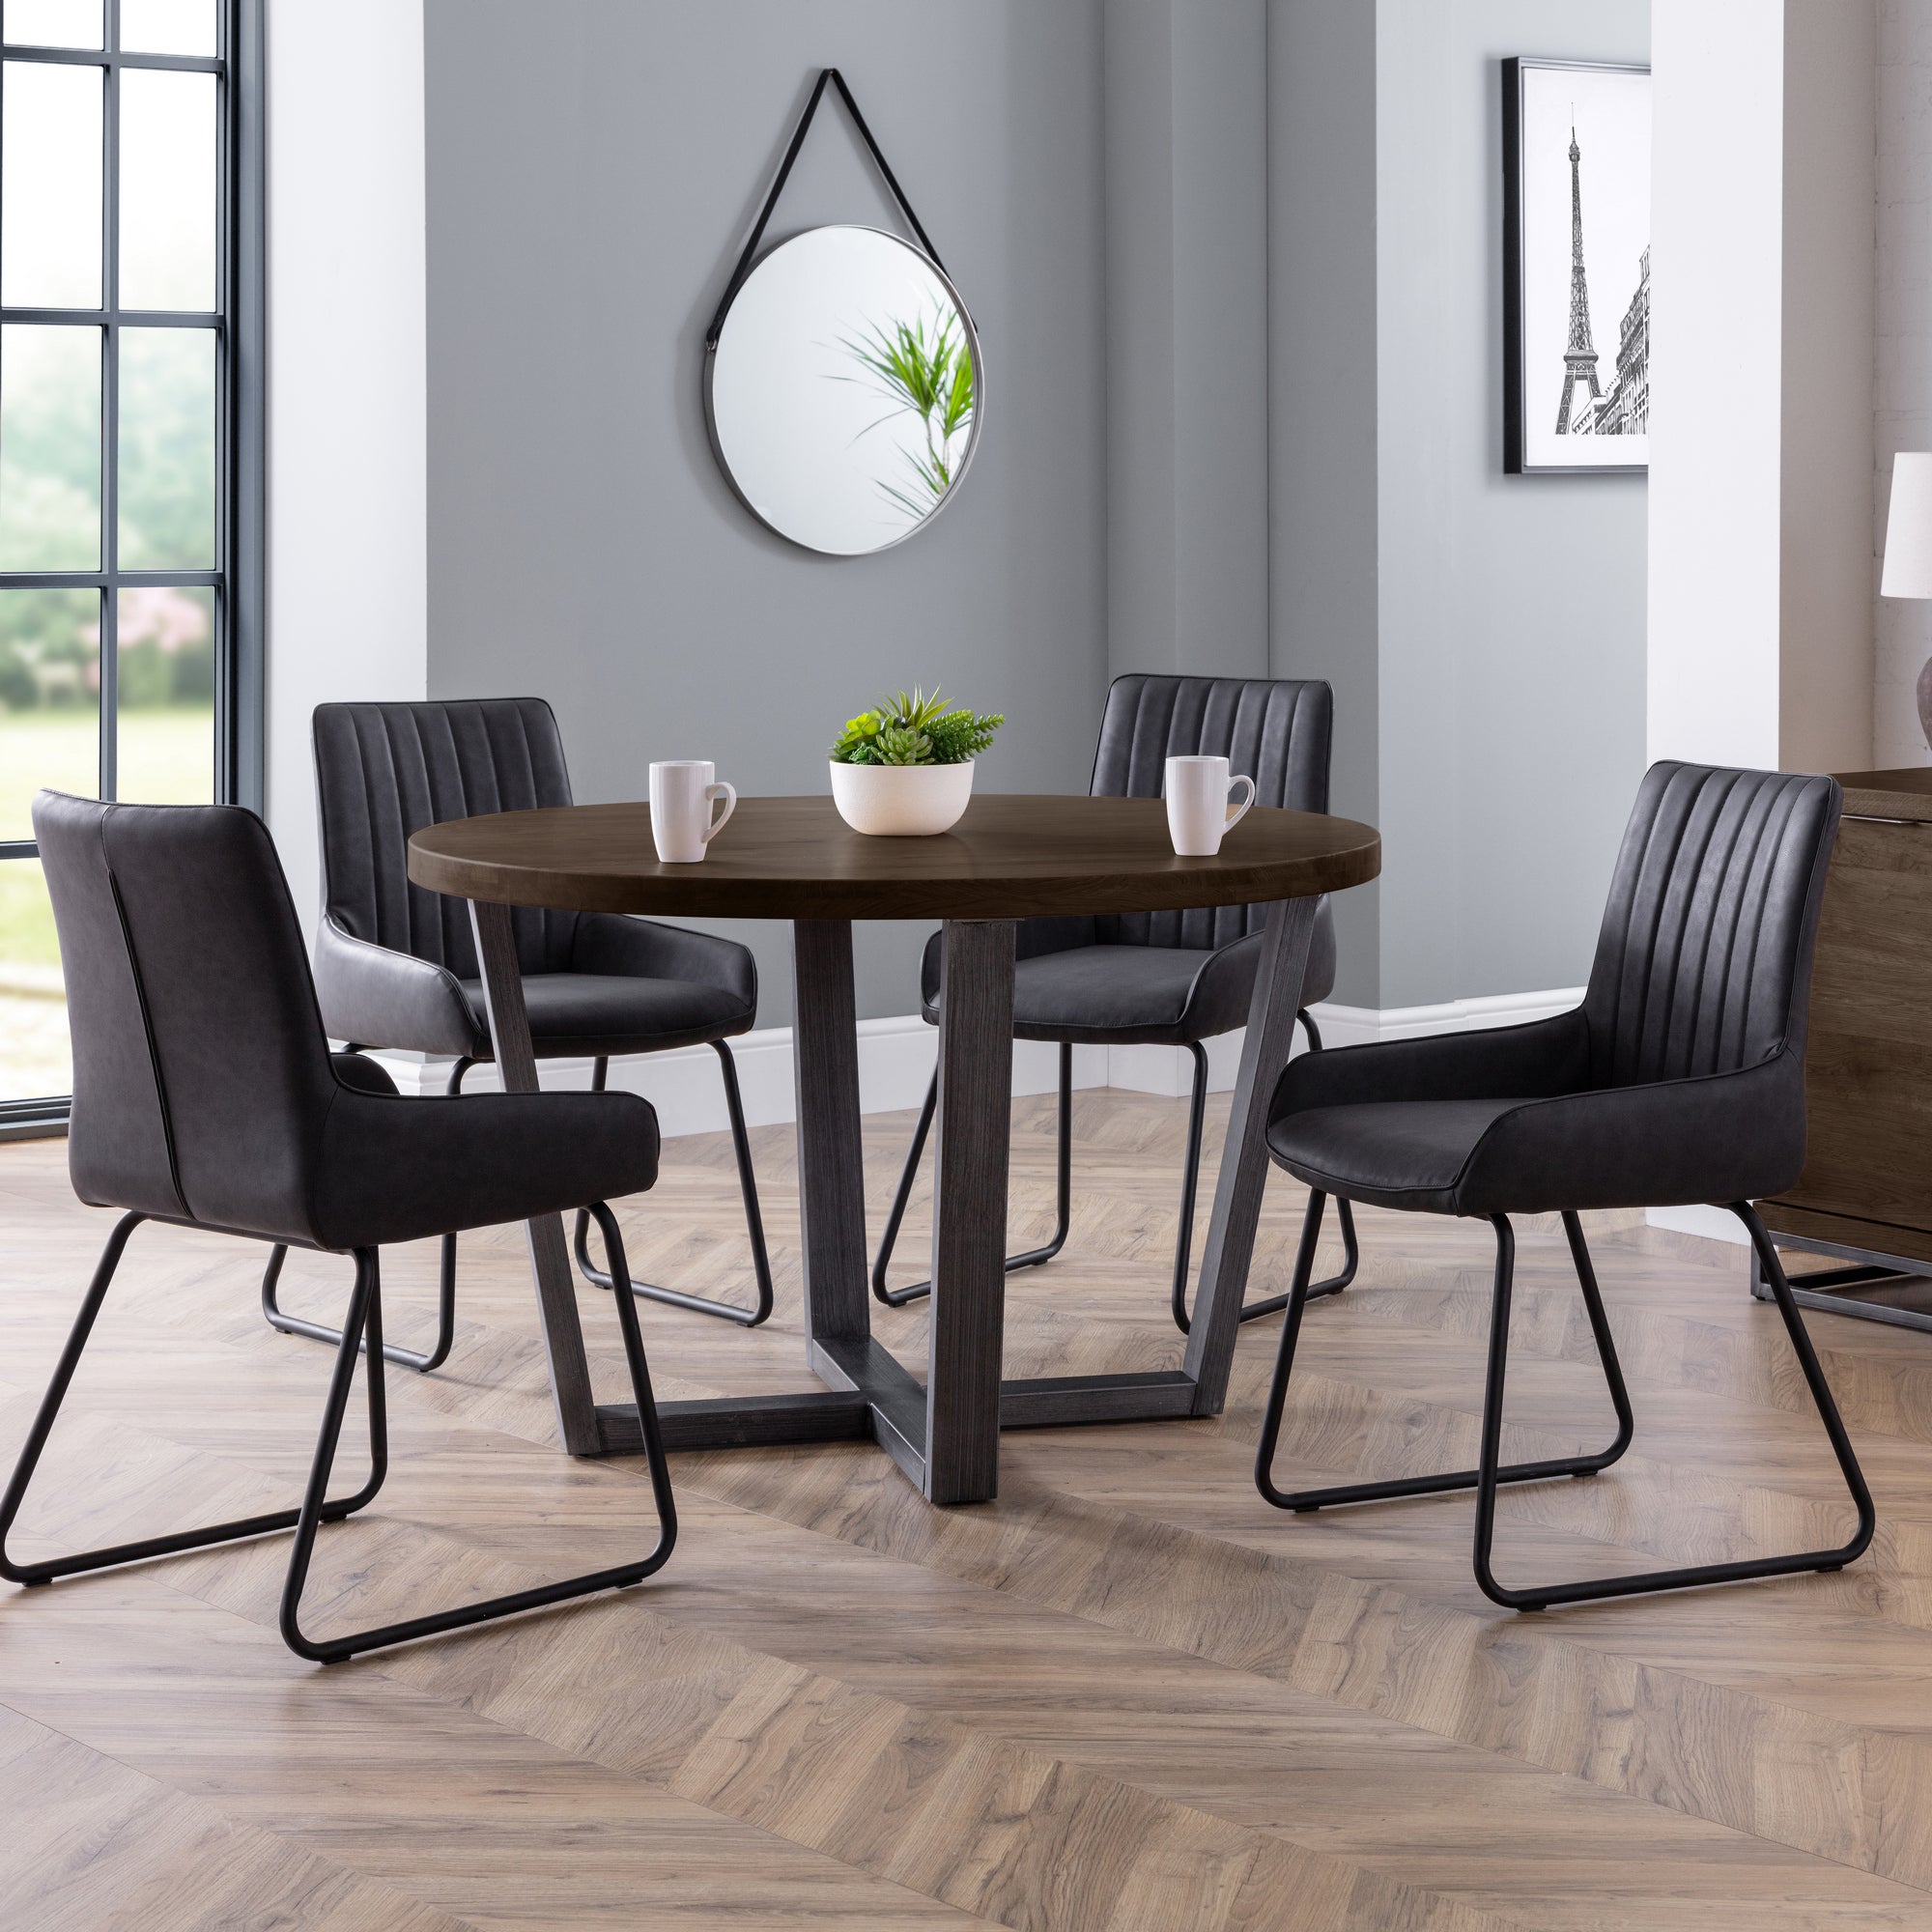 Brooklyn 4 Seater Round Dining Table, Oak